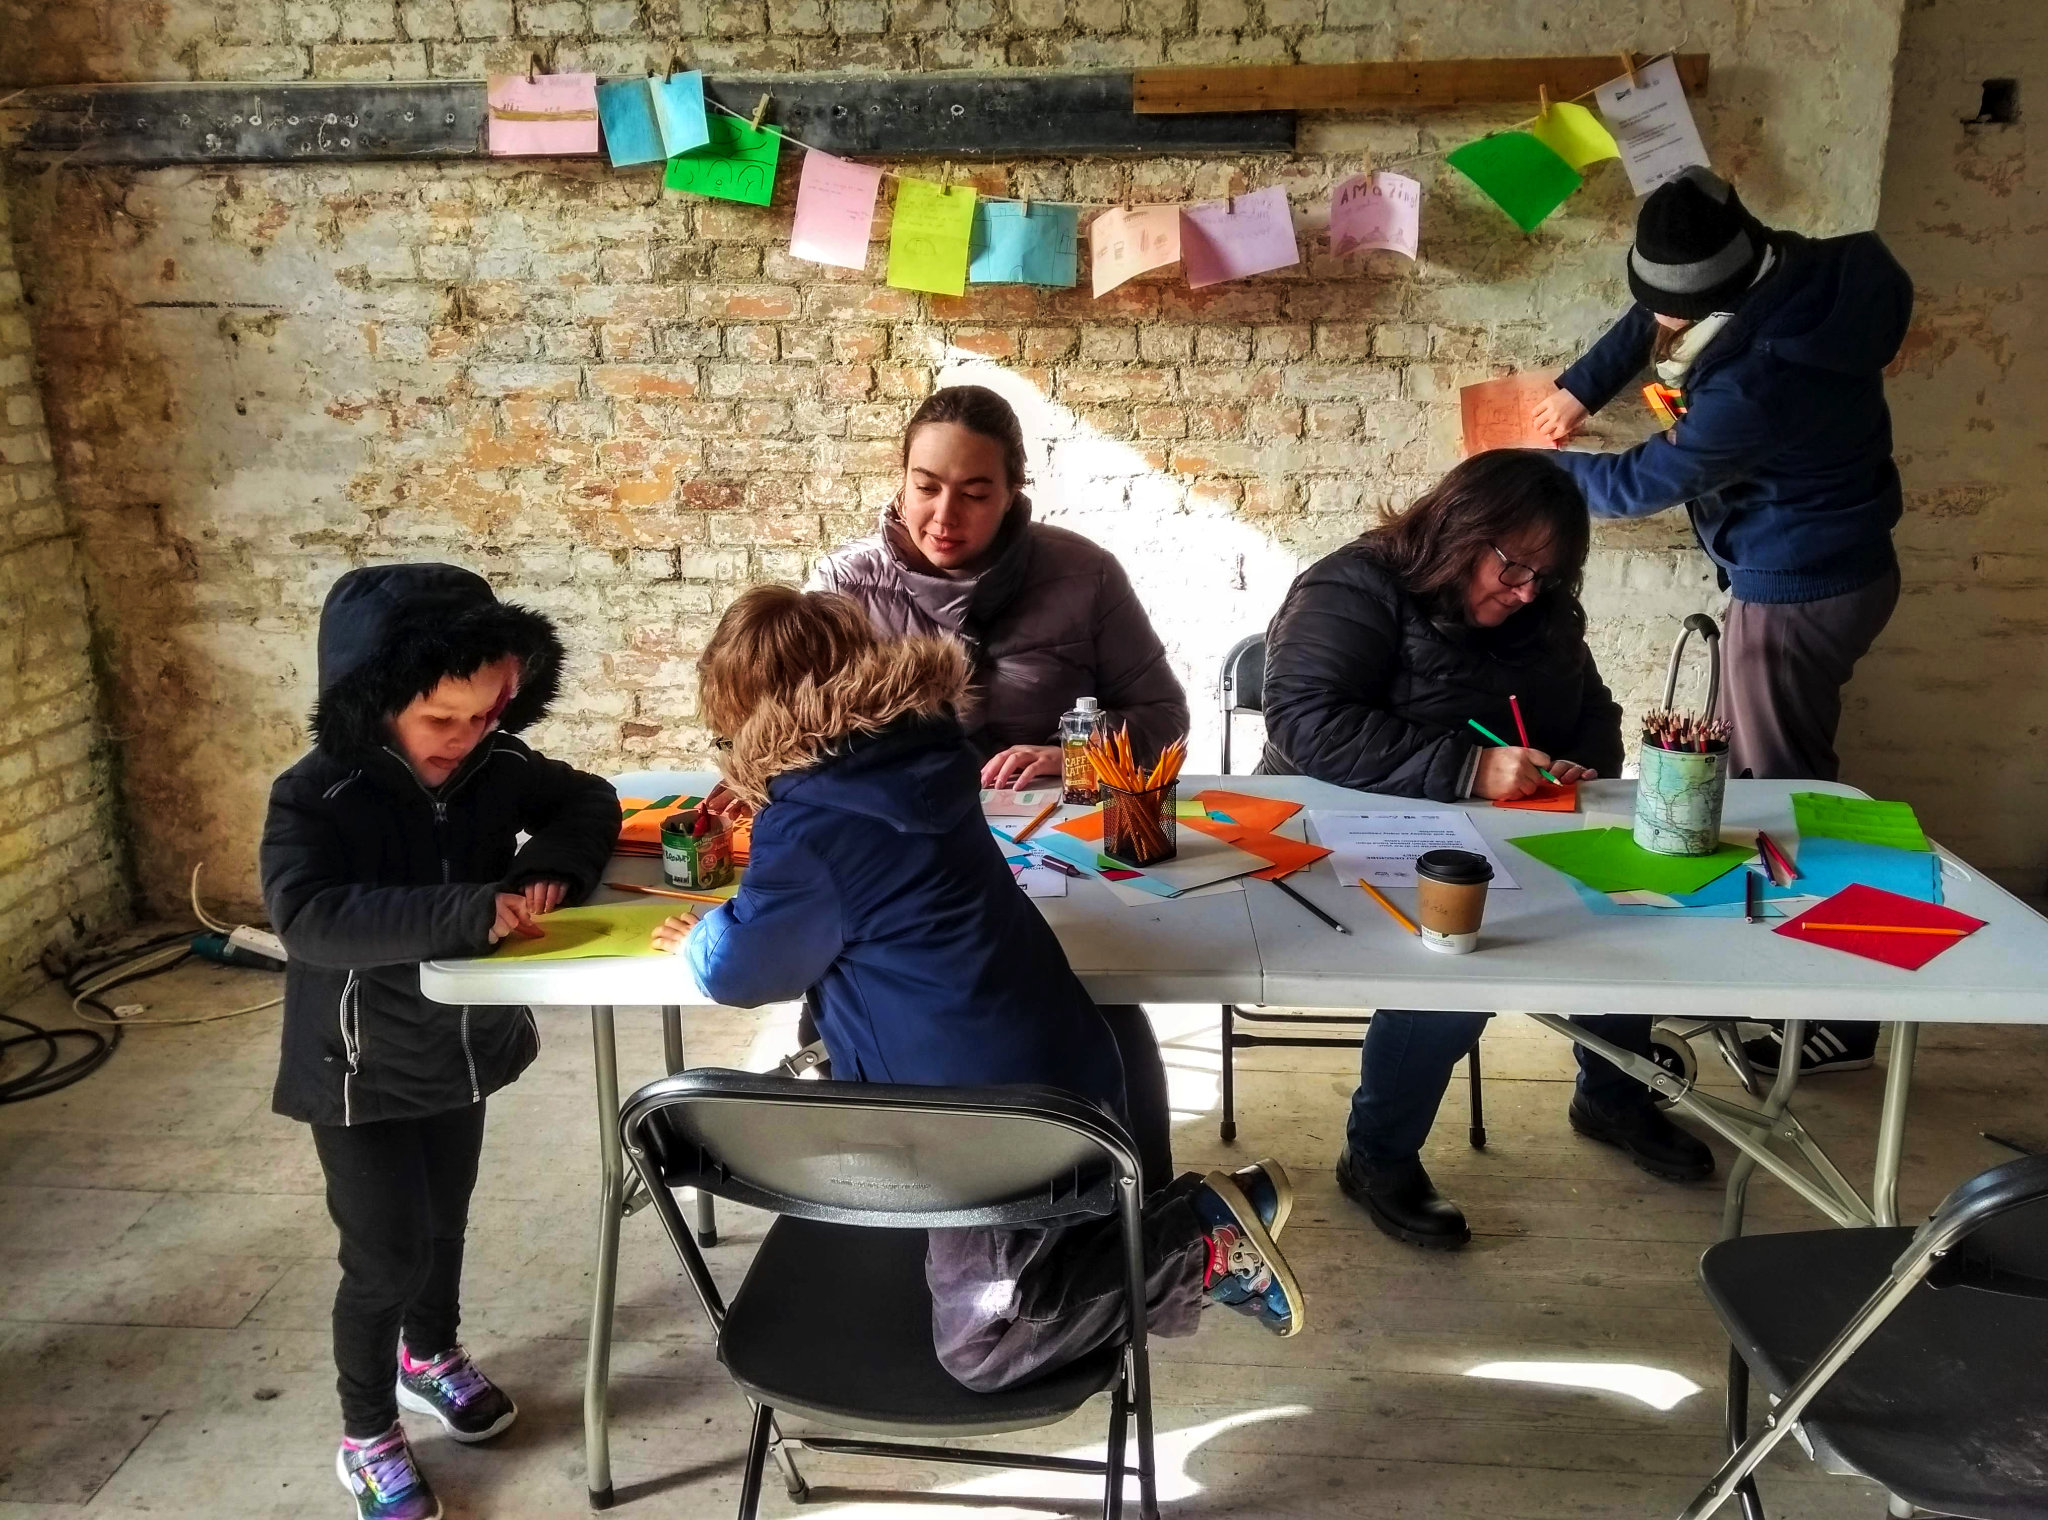 Mothers with children busy creating art in a workshop in Fort Burgoyne, Dover